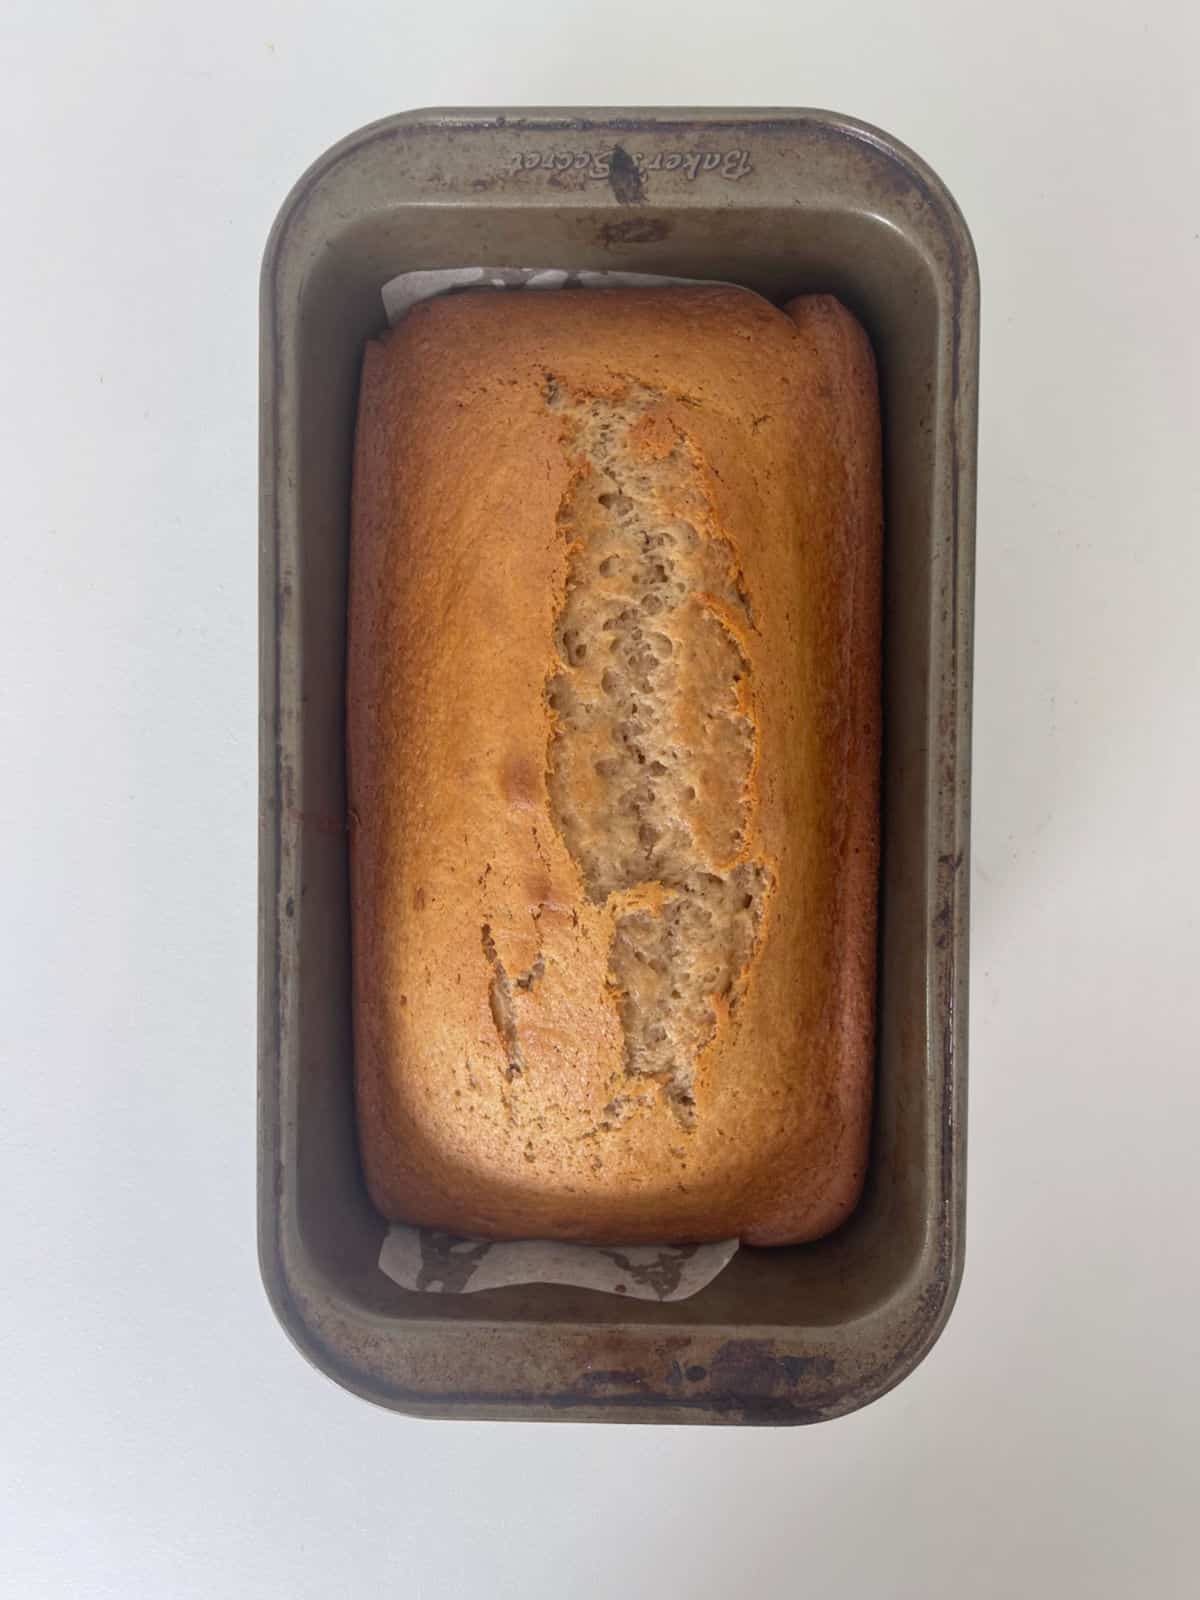 Baked Banana Bread straight out of the oven in a baking tin.